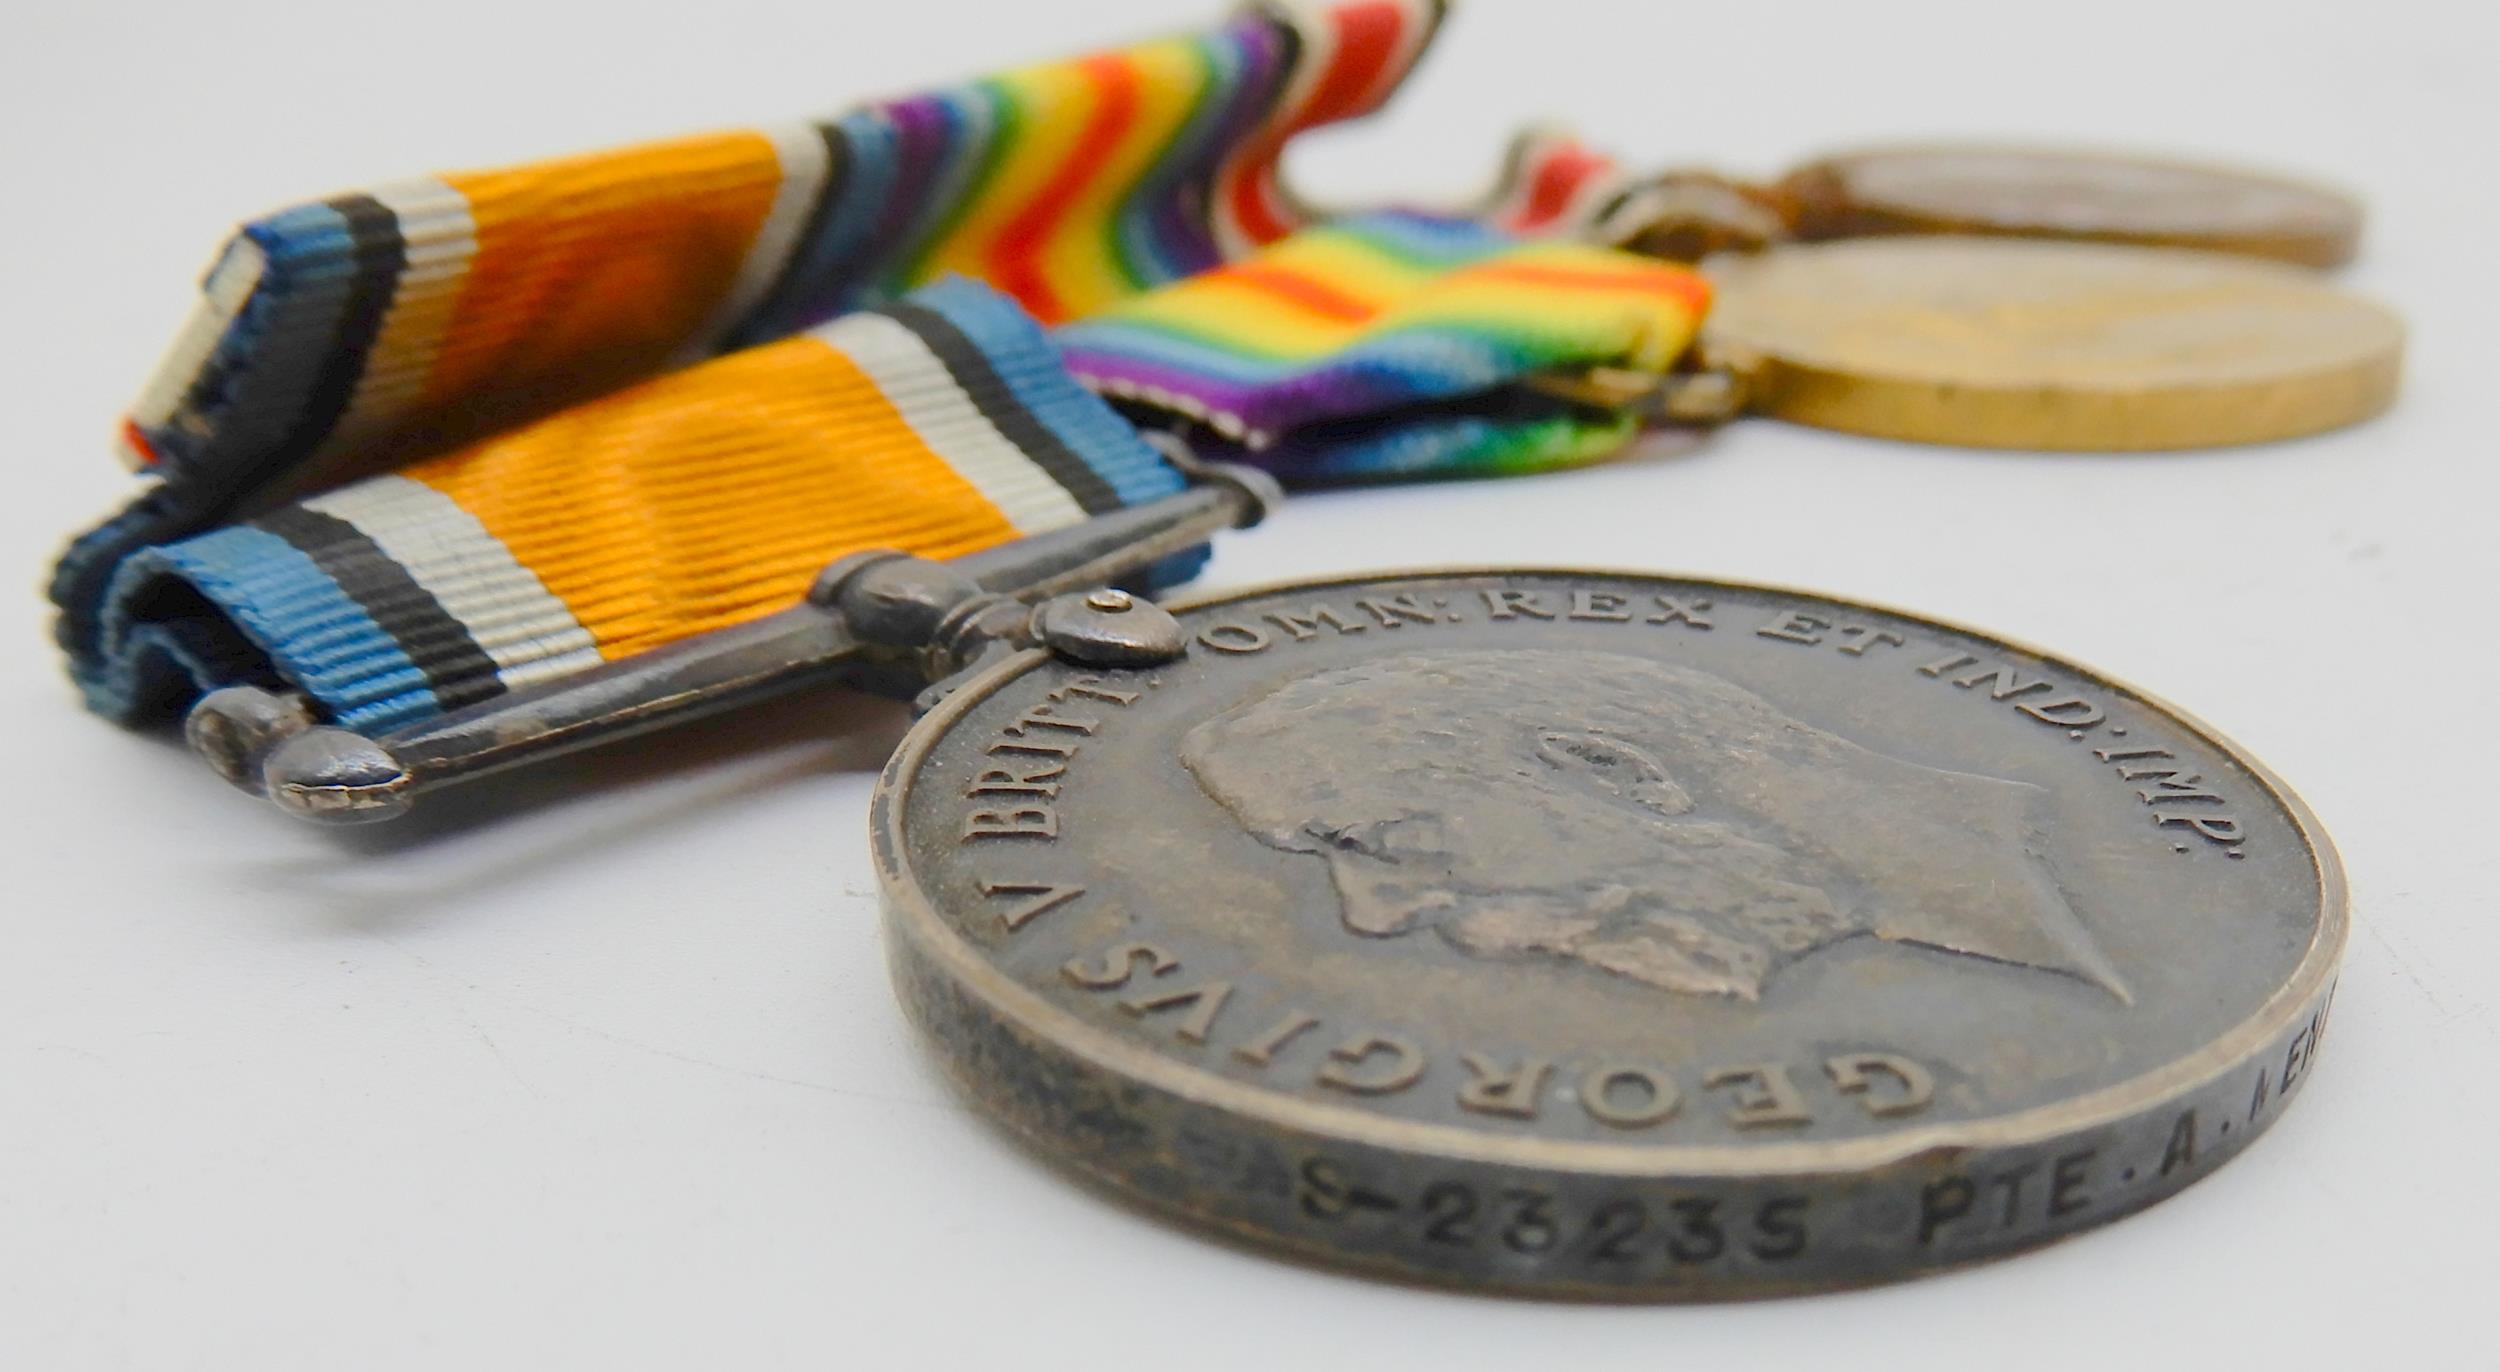 A set of three WW1 medals awarded to PTE Alexander Menzies S-23235 A. & S. H. together with a set of - Image 2 of 14